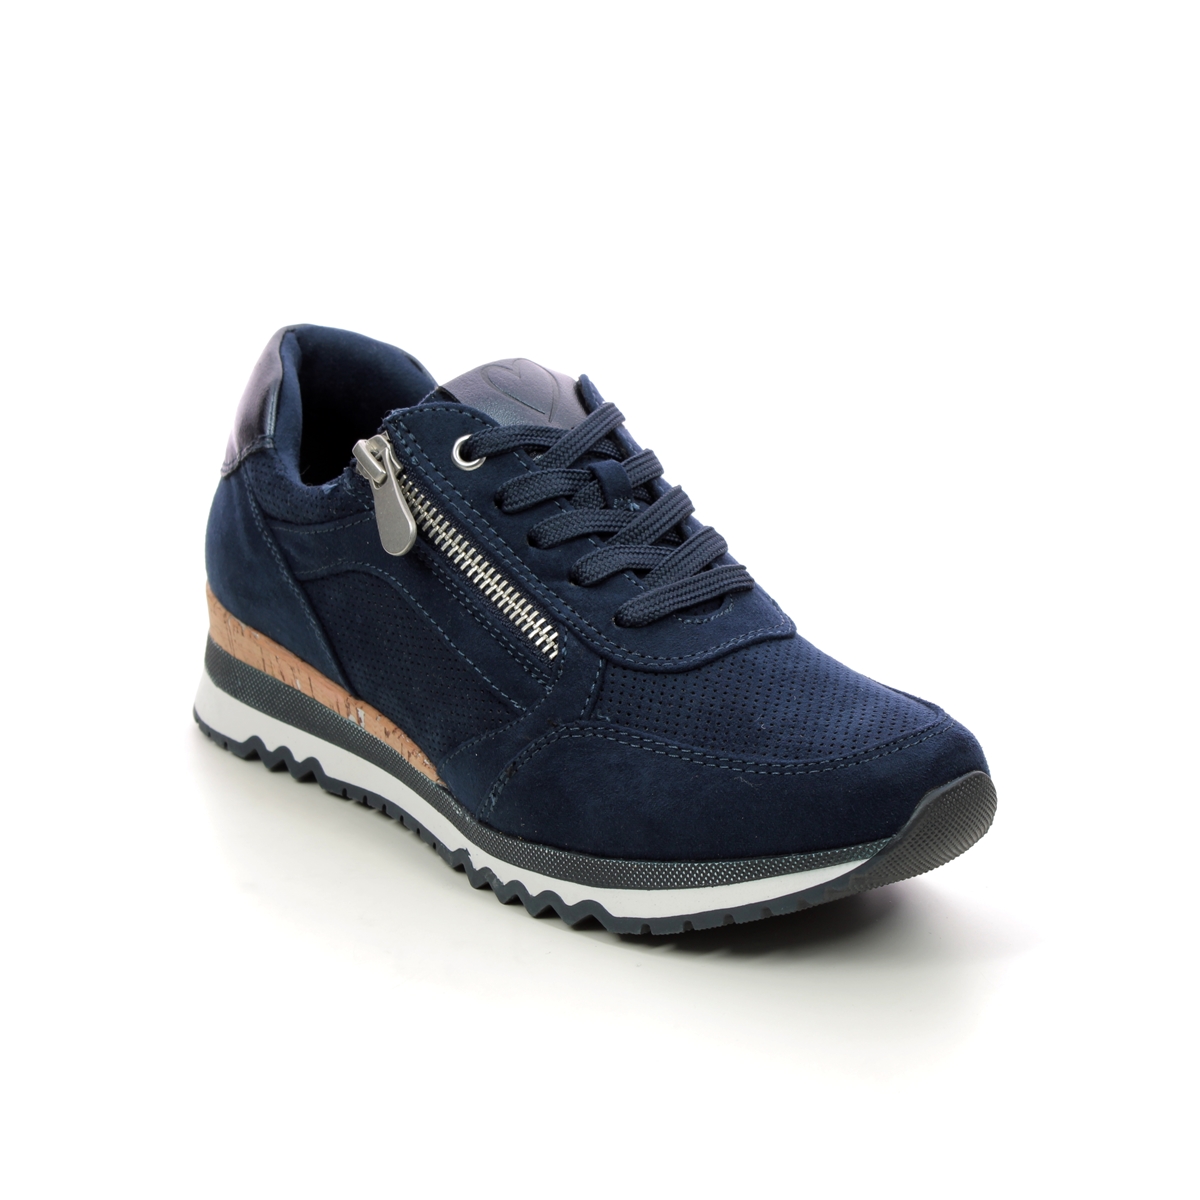 Marco Tozzi Bonallo Cork Navy Womens trainers 23781-41-890 in a Plain Textile in Size 36